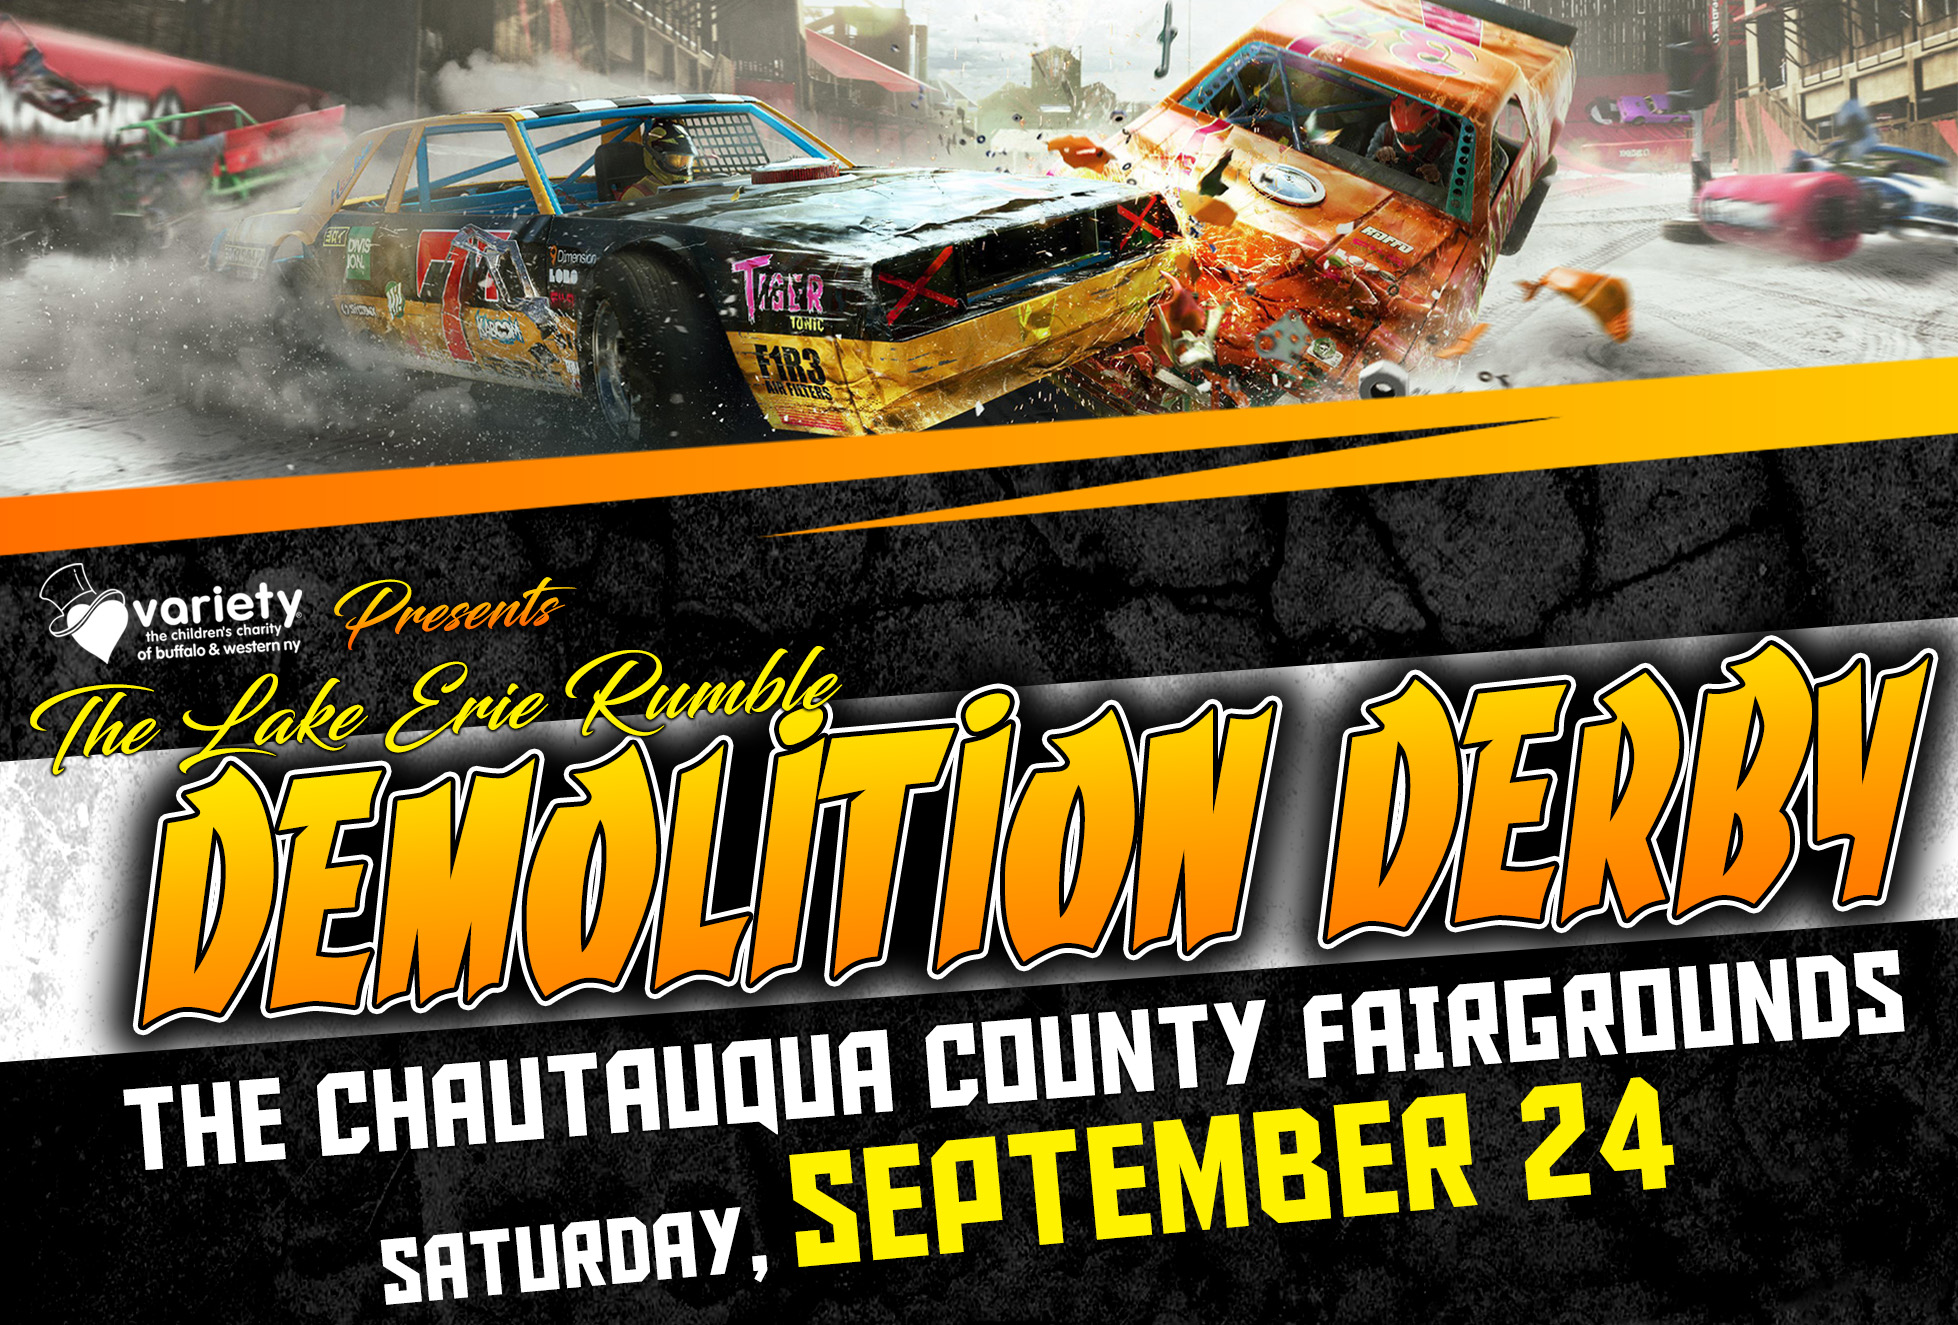 Variety Presents: The Lake Erie Rumble Demolition Derby!